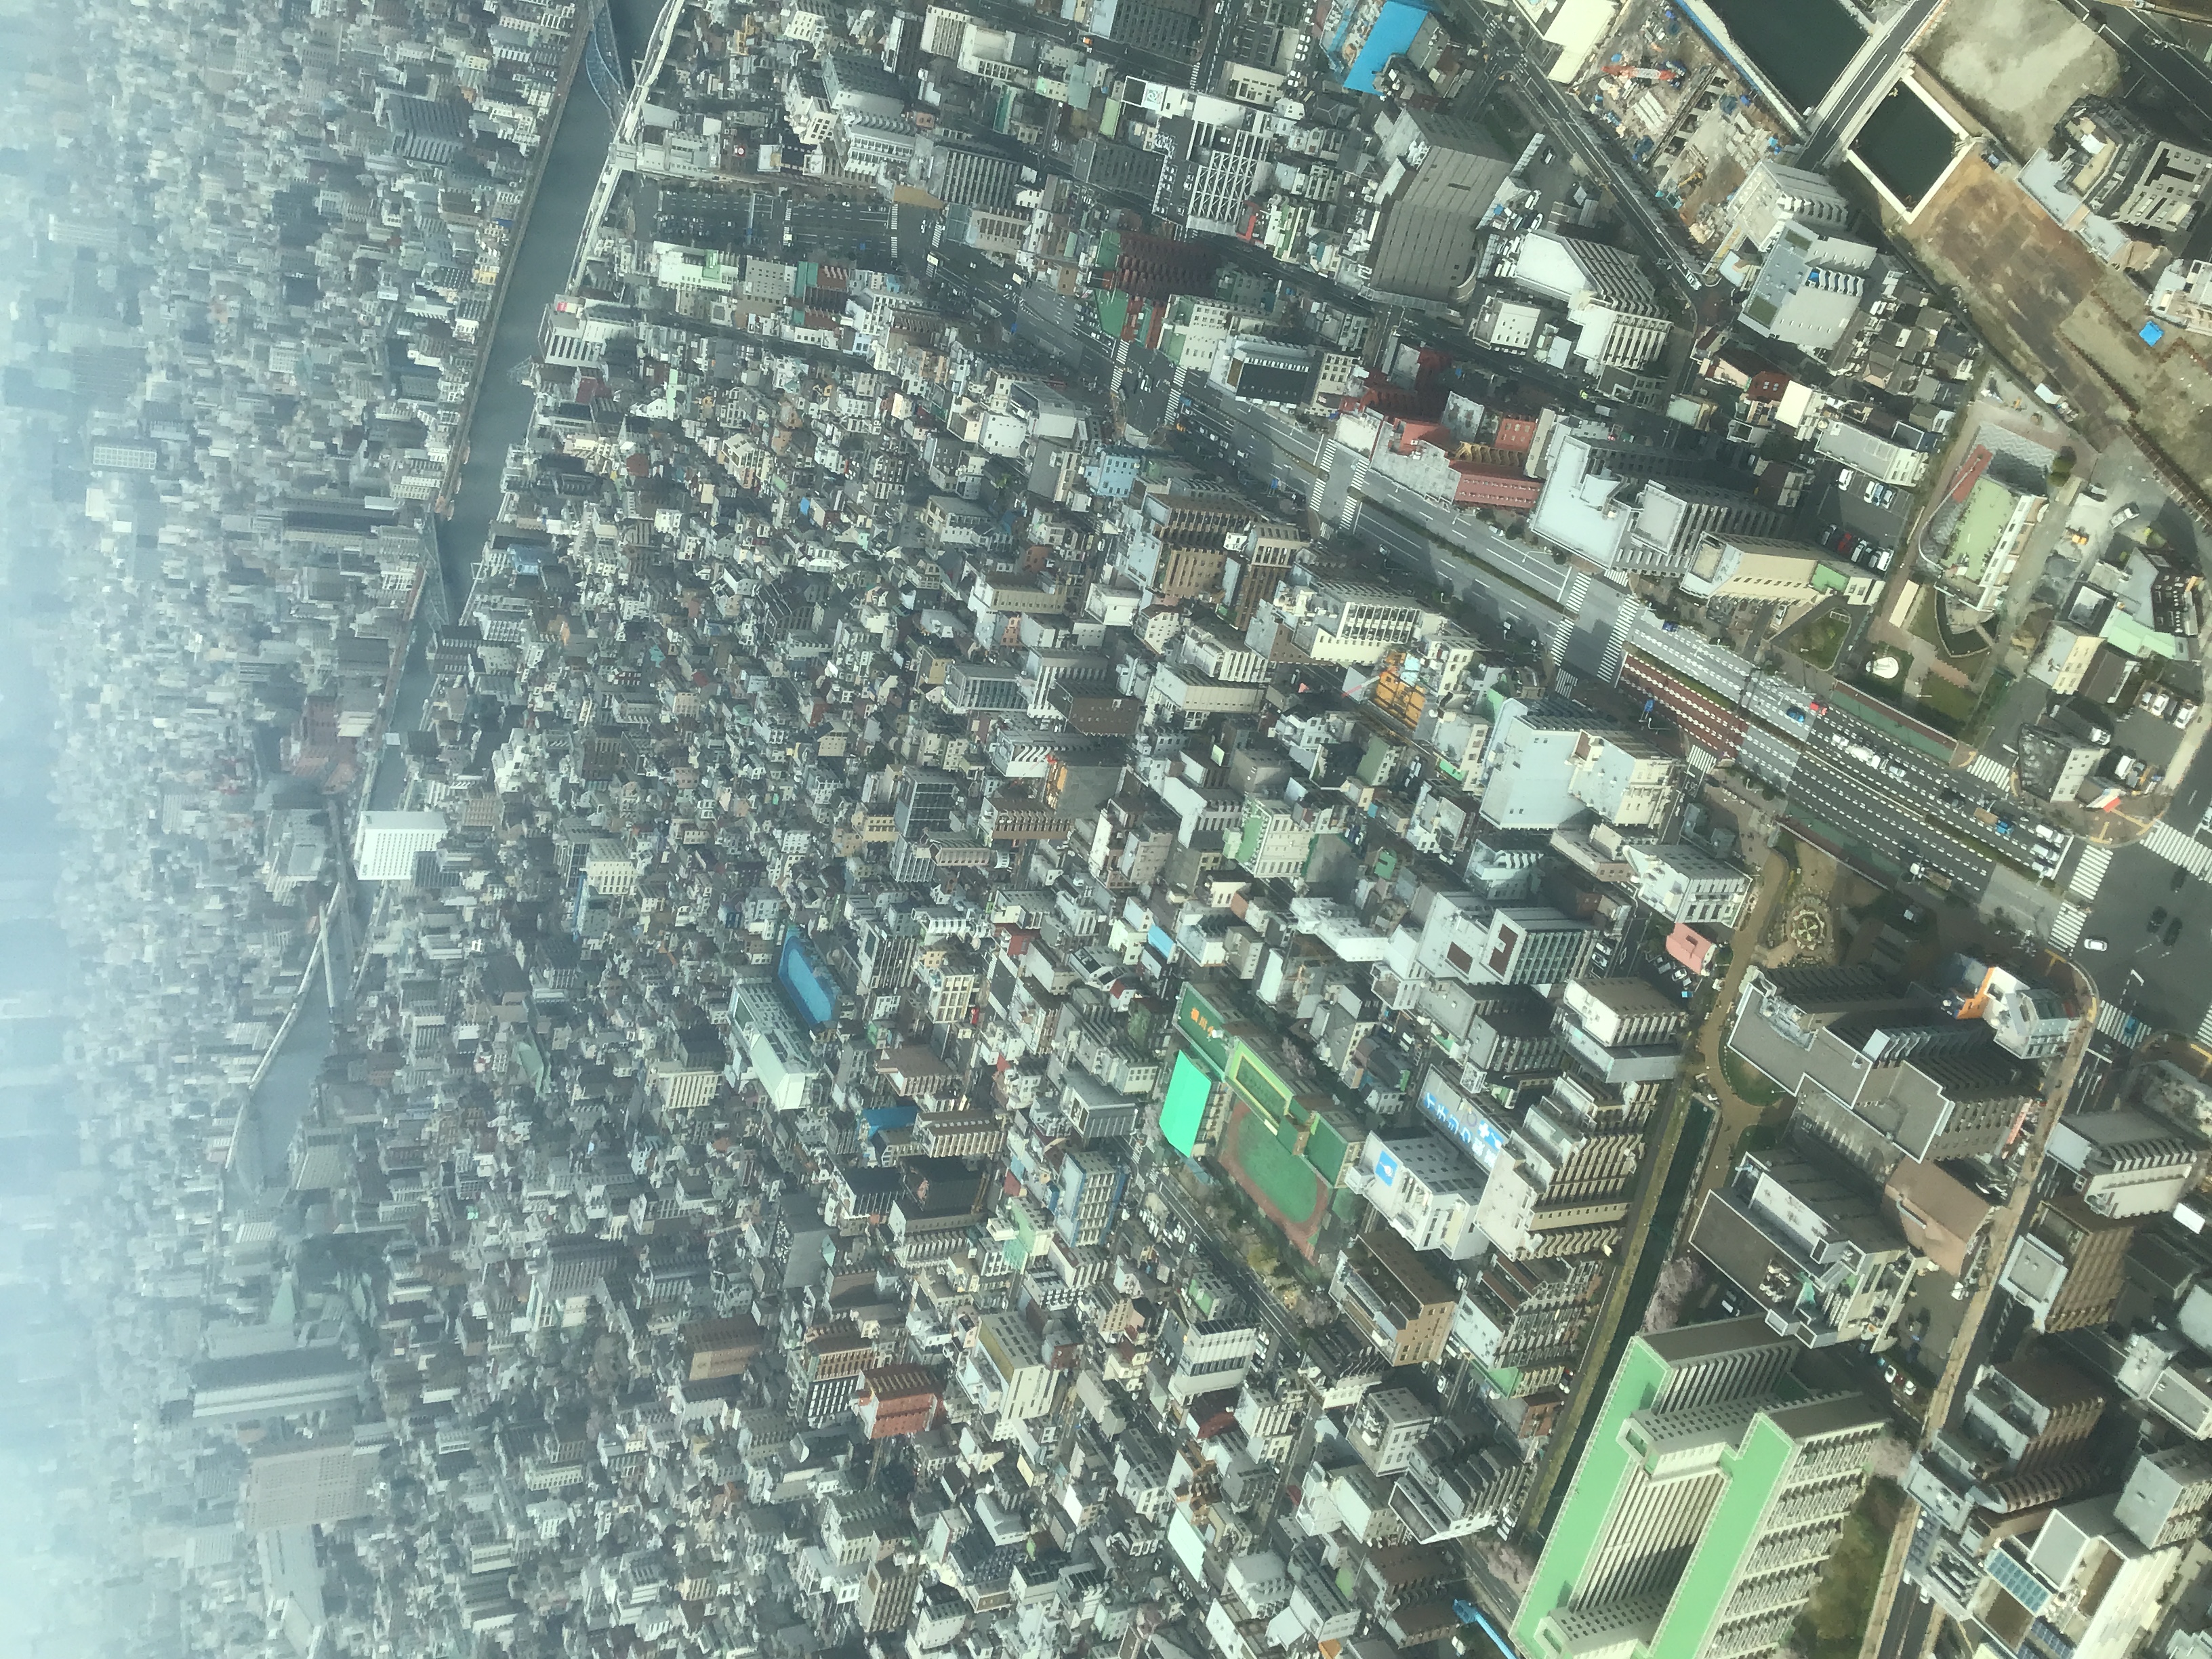 A view from the SkyTree angled down